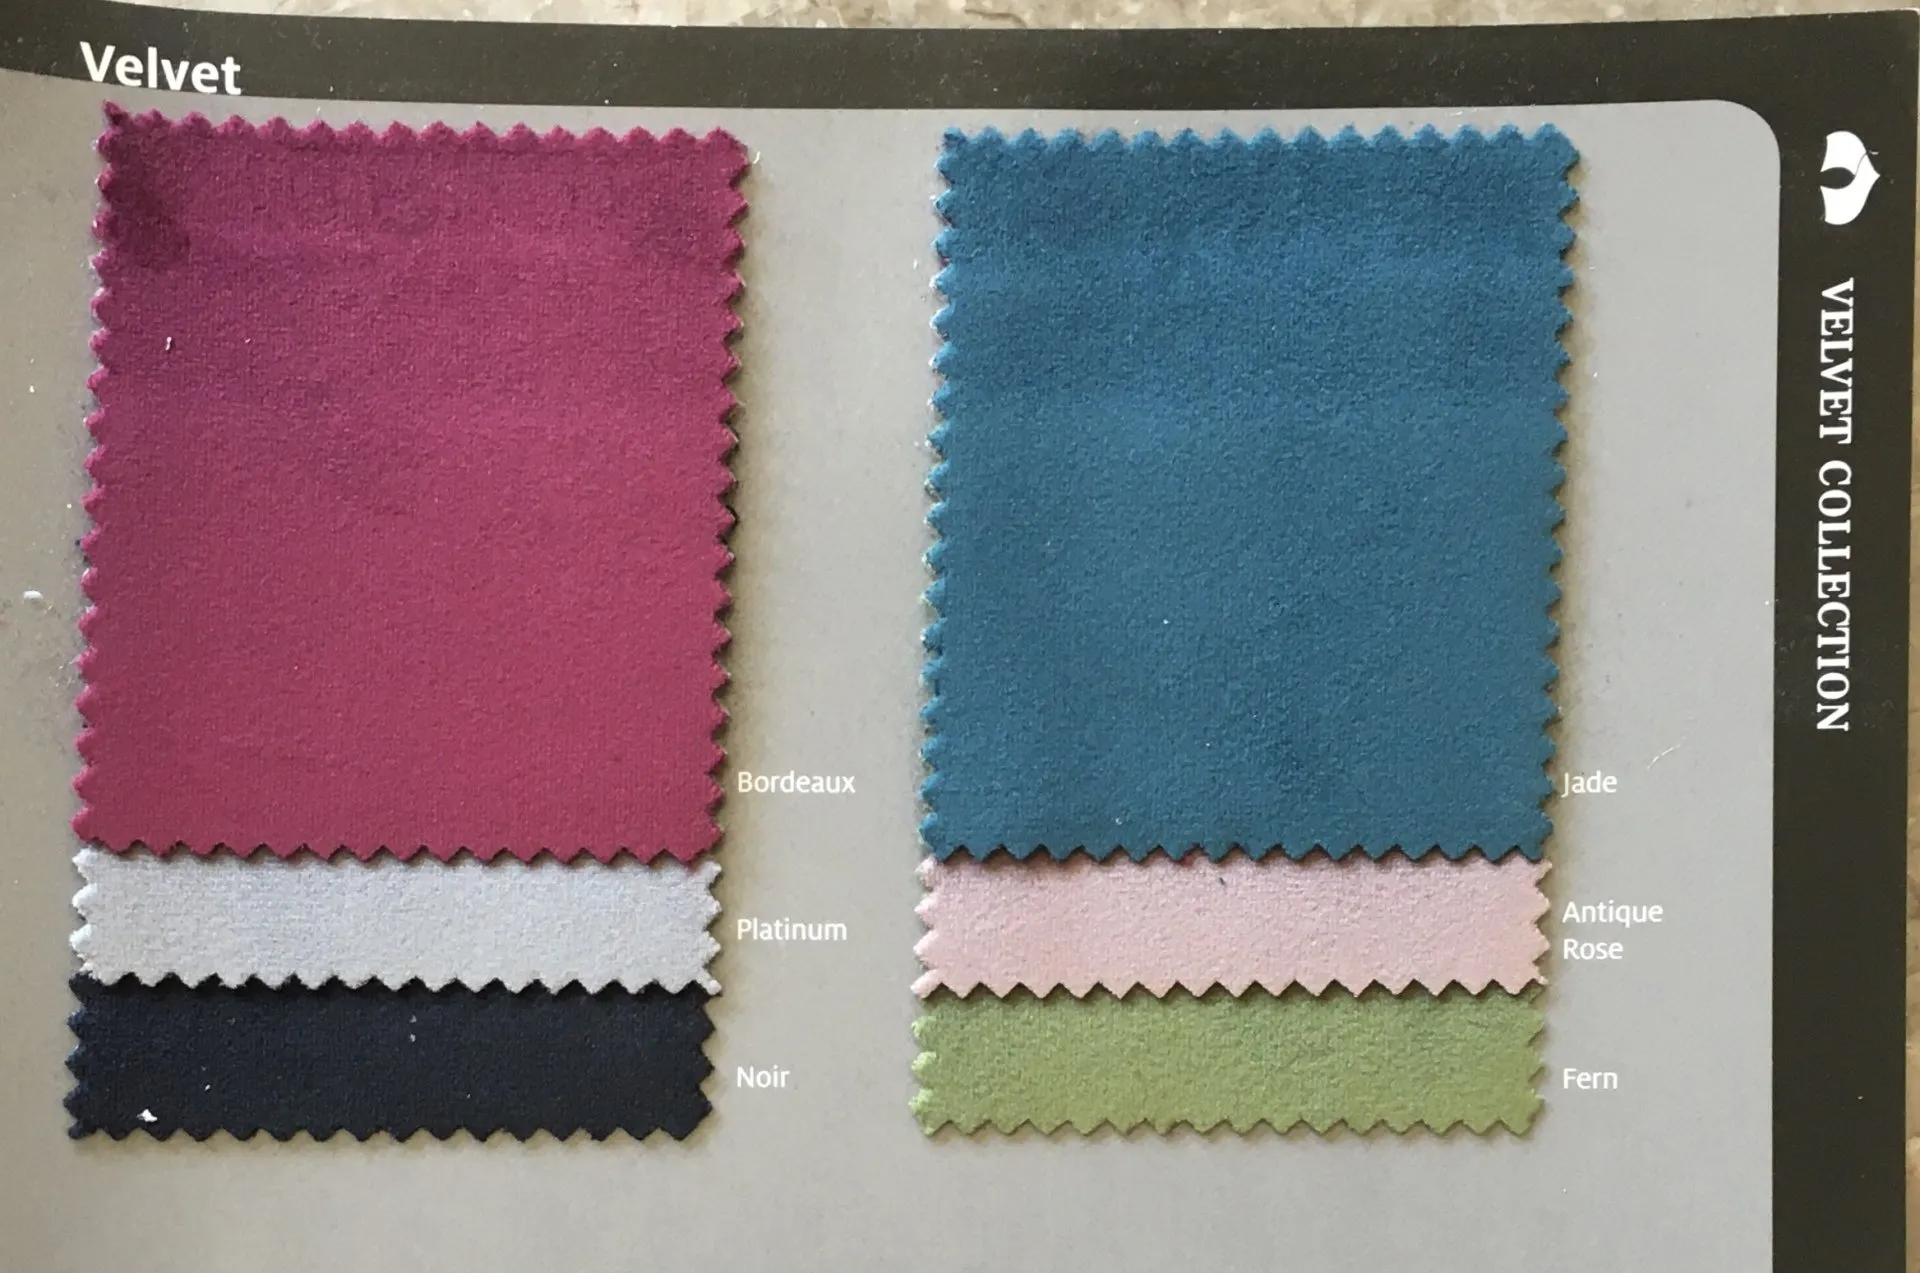 velvet linen swatches, offered by Premier Wedding & Party Rental